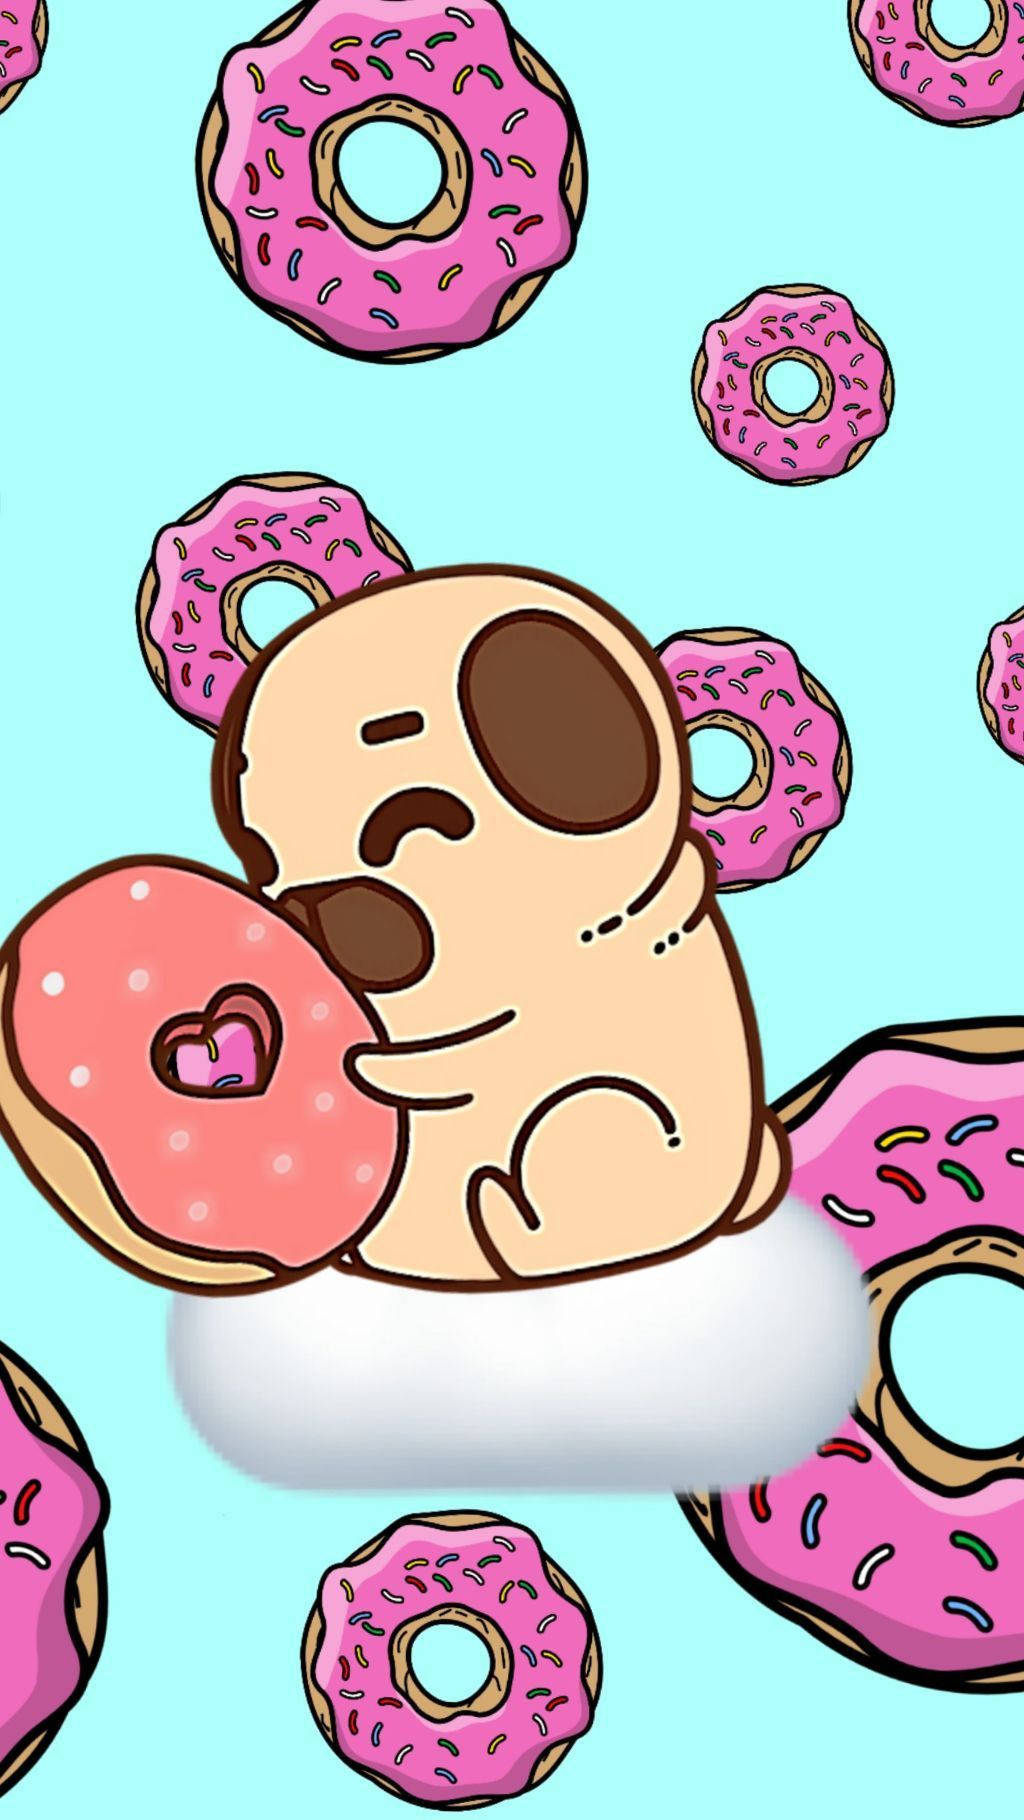 Download Pugs And Donuts Cute Tablet Wallpaper | Wallpapers.com